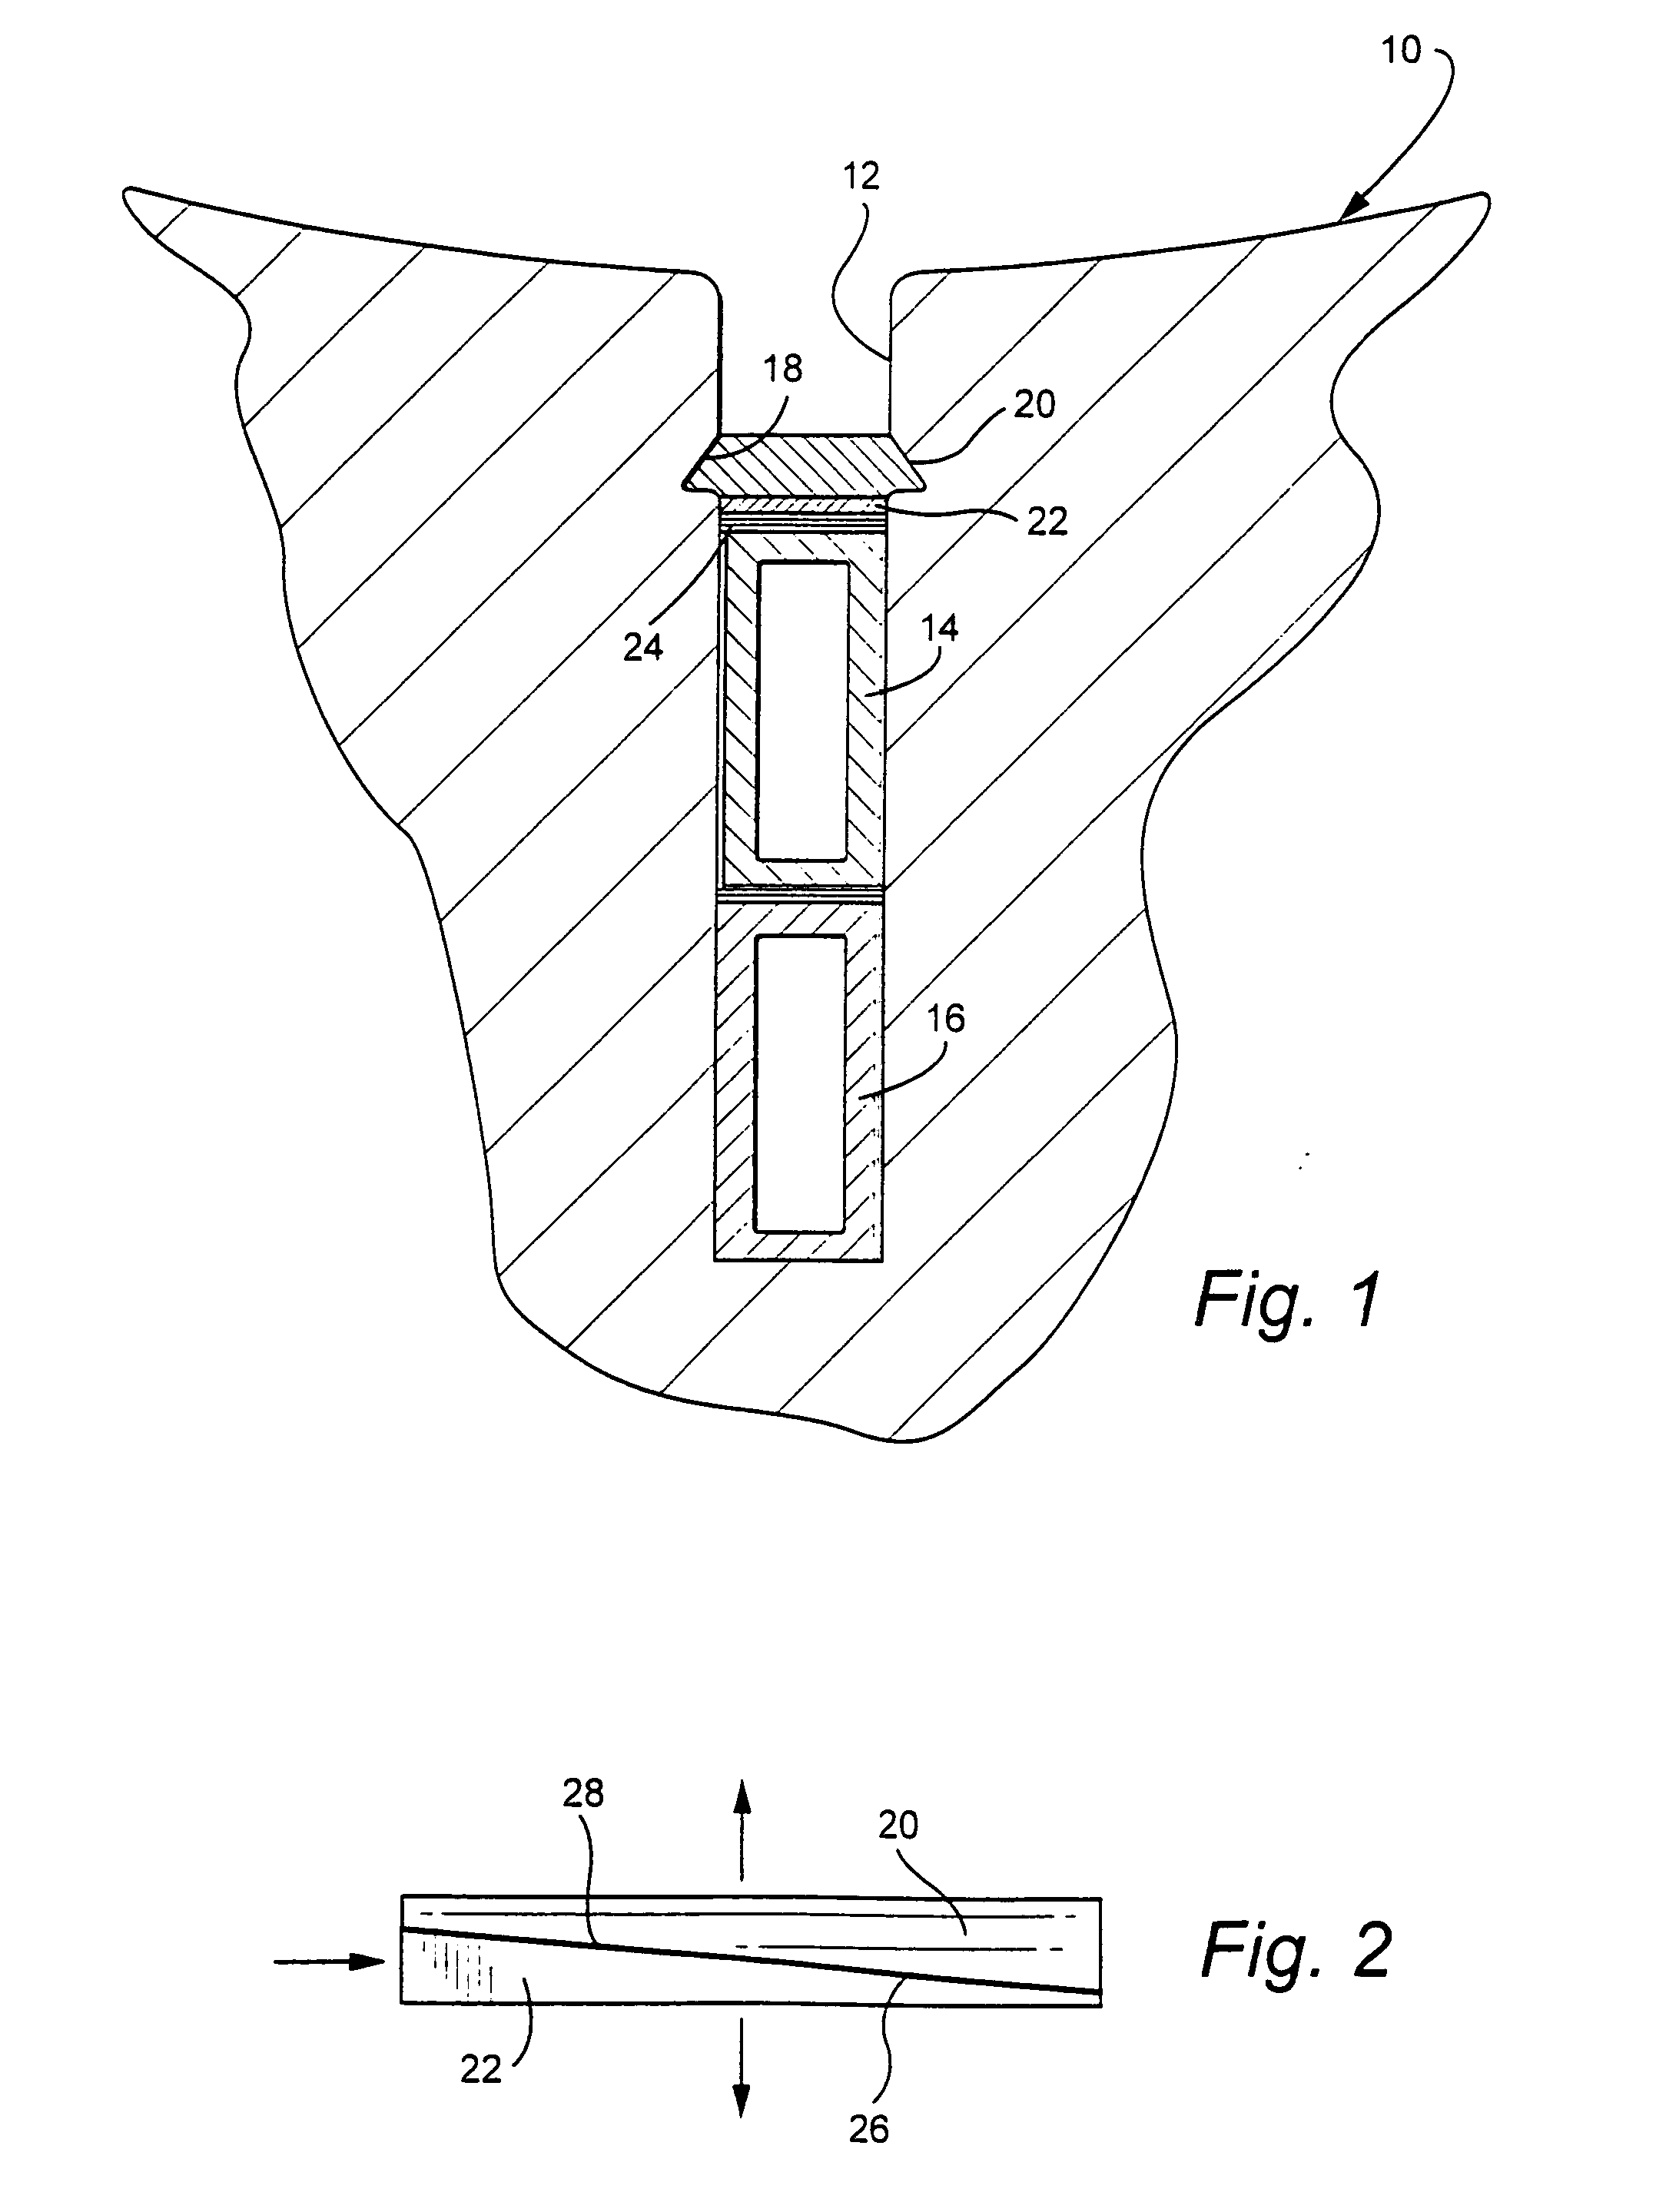 Re-tightenable stator body wedge system